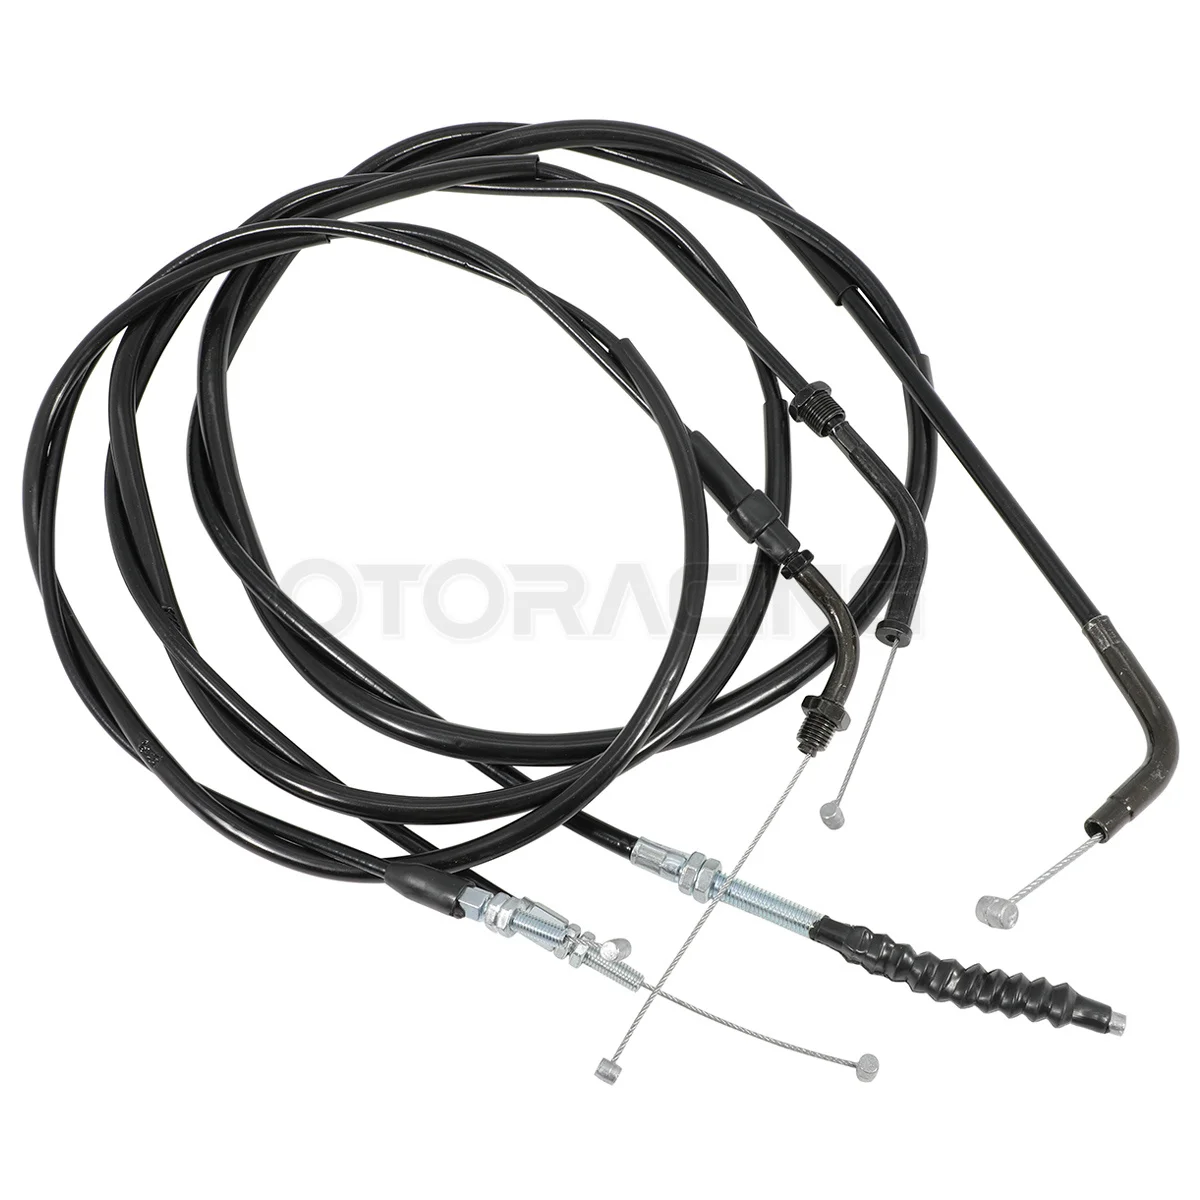 

Motorcycle Lengthened Throttle/Clutch Cable For Honda Steed 400 600 VLX400 Shadow VLX600 VT600 Magna VF250 VF750 VT400